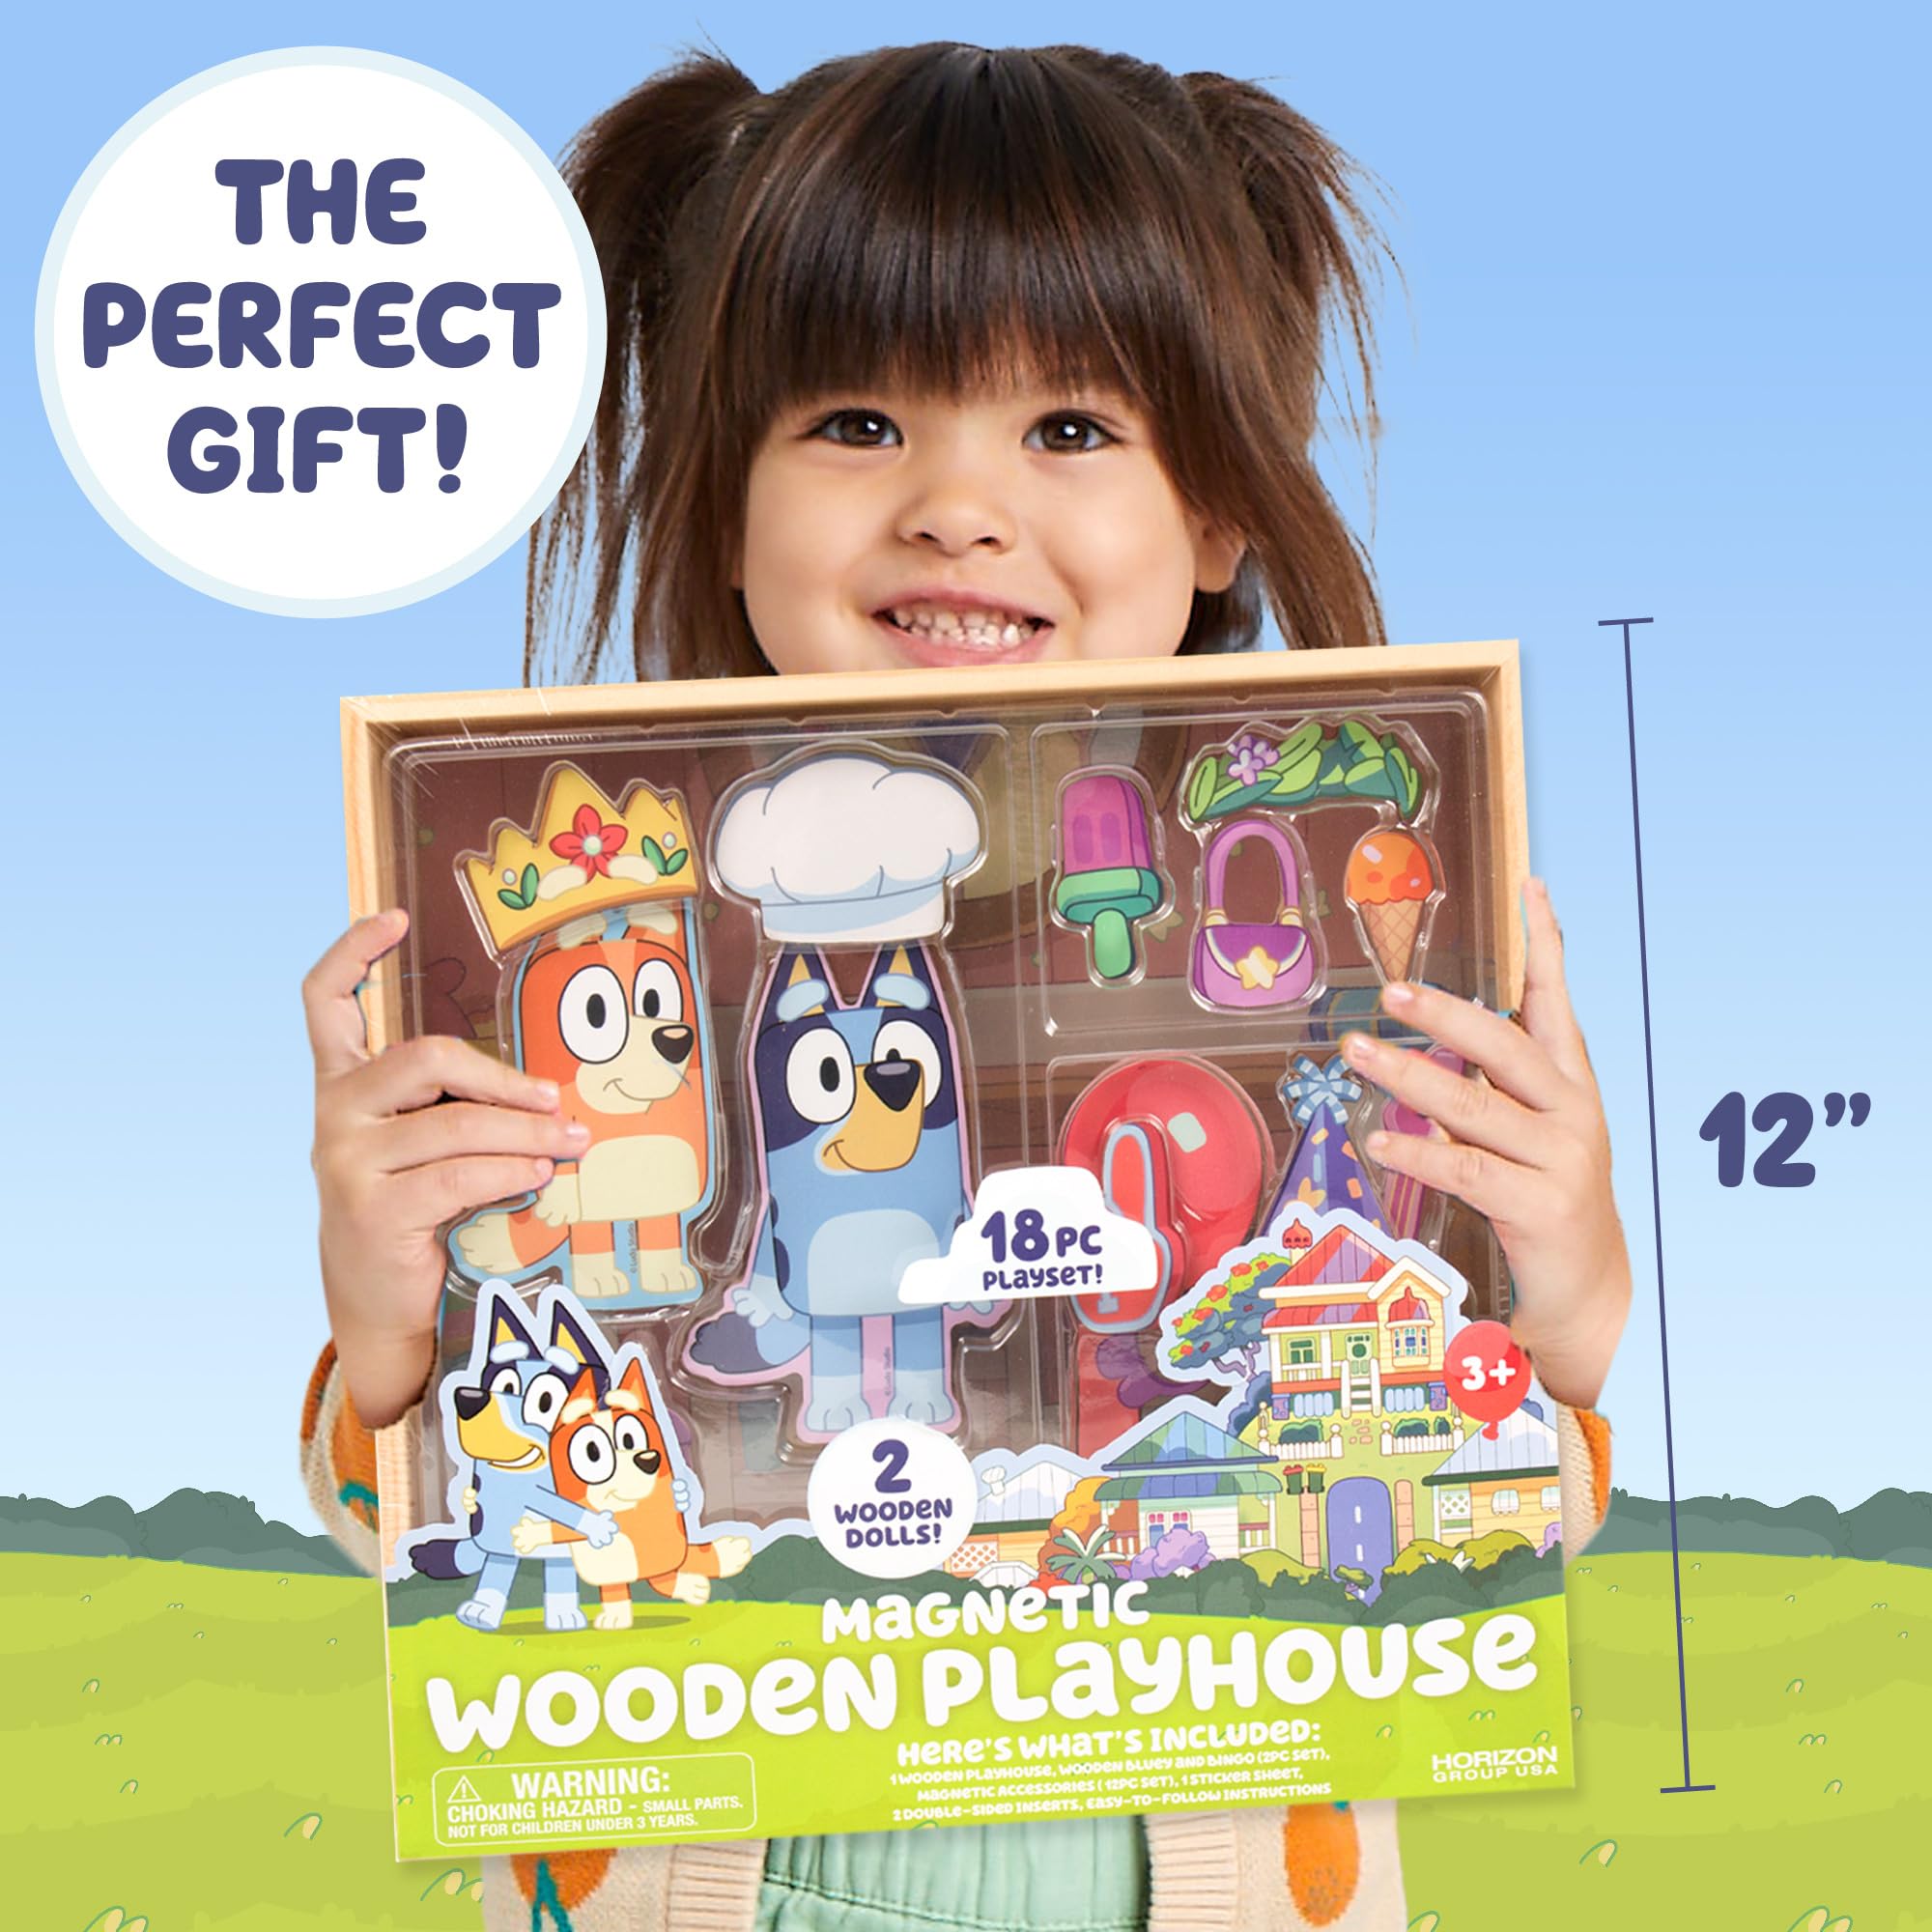 Bluey Magnetic Wooden Playhouse, 18 Piece Activity Set, Includes 2 Wooden Dolls House, Great Toys for Kids, Fun Birthday Party Activity, House Playset